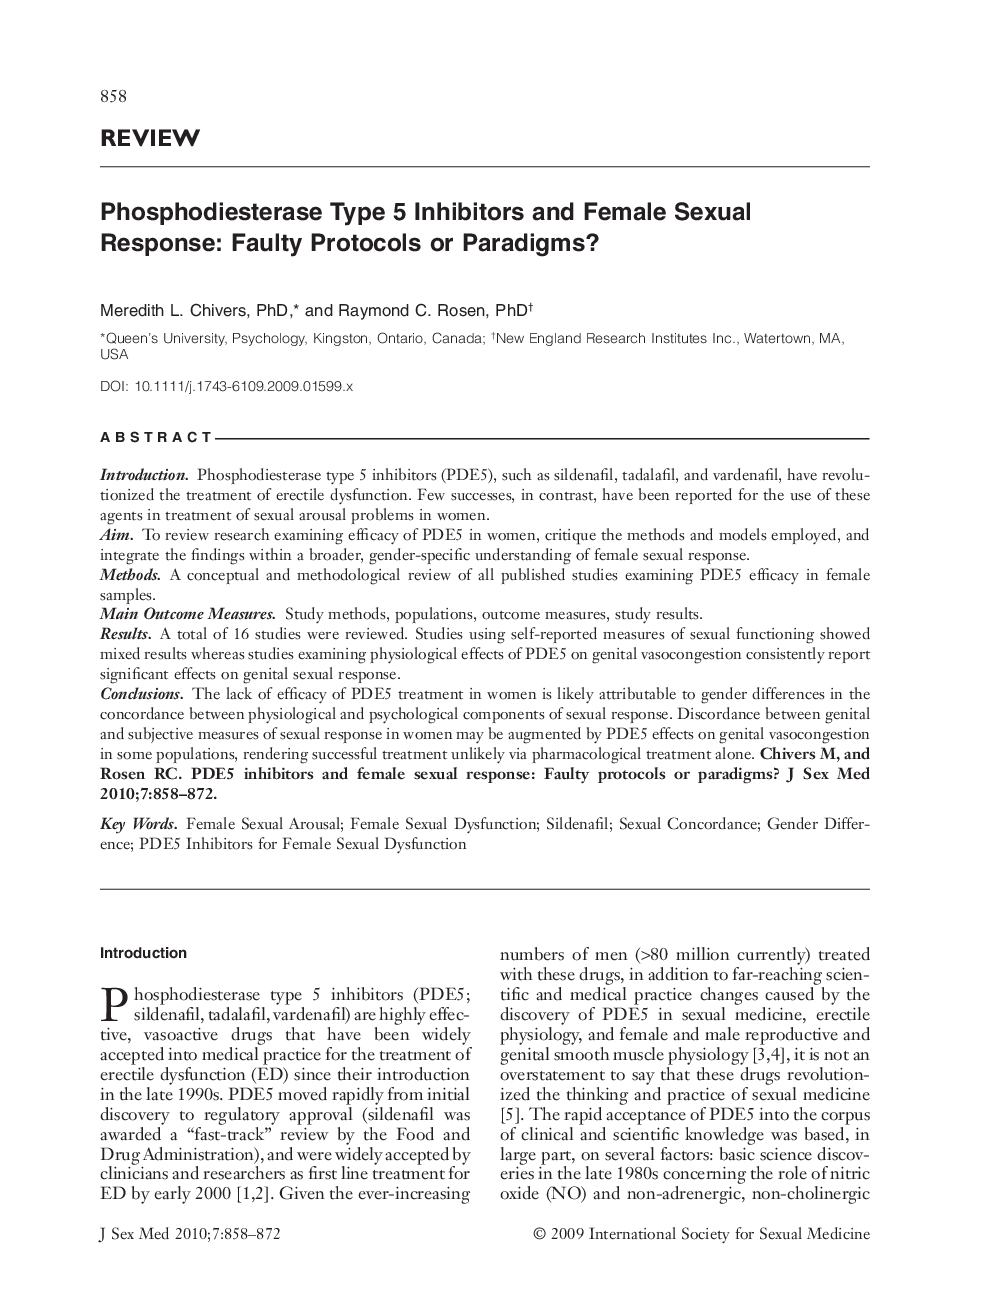 Phosphodiesterase Type 5 Inhibitors and Female Sexual Response: Faulty Protocols or Paradigms?